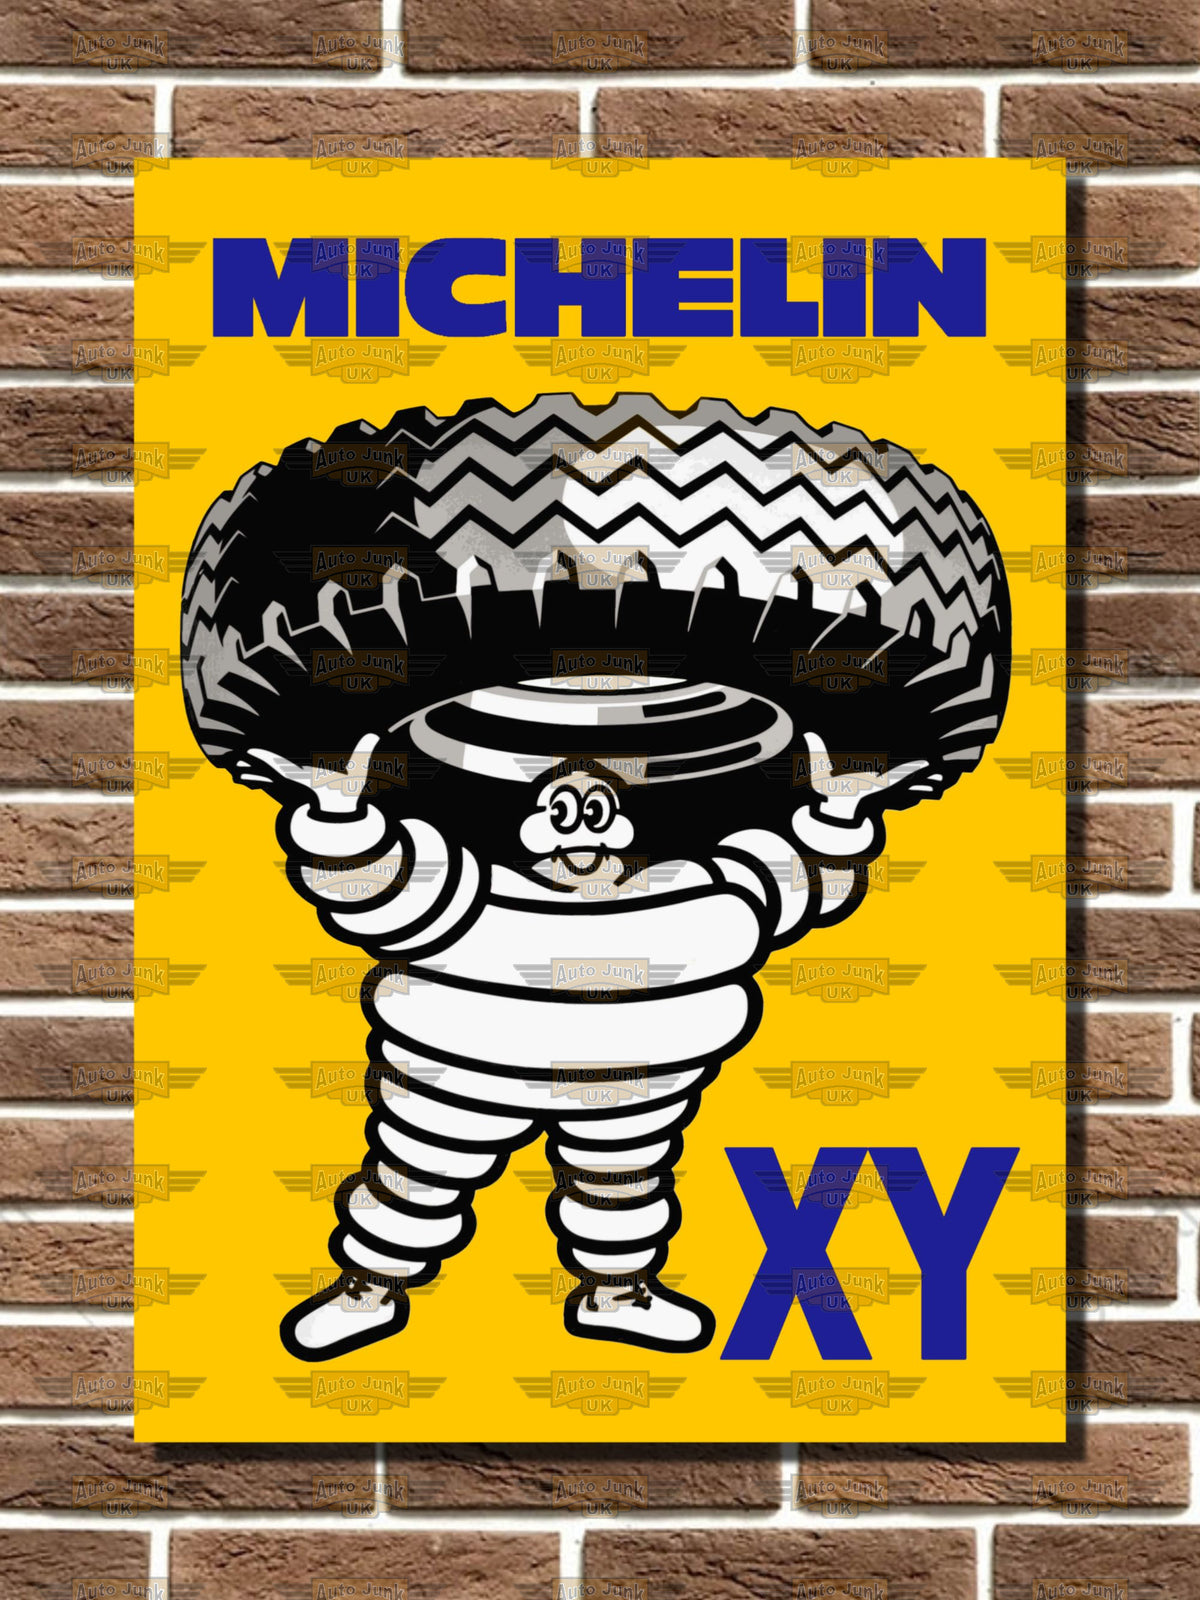 Michelin XY Metal Sign